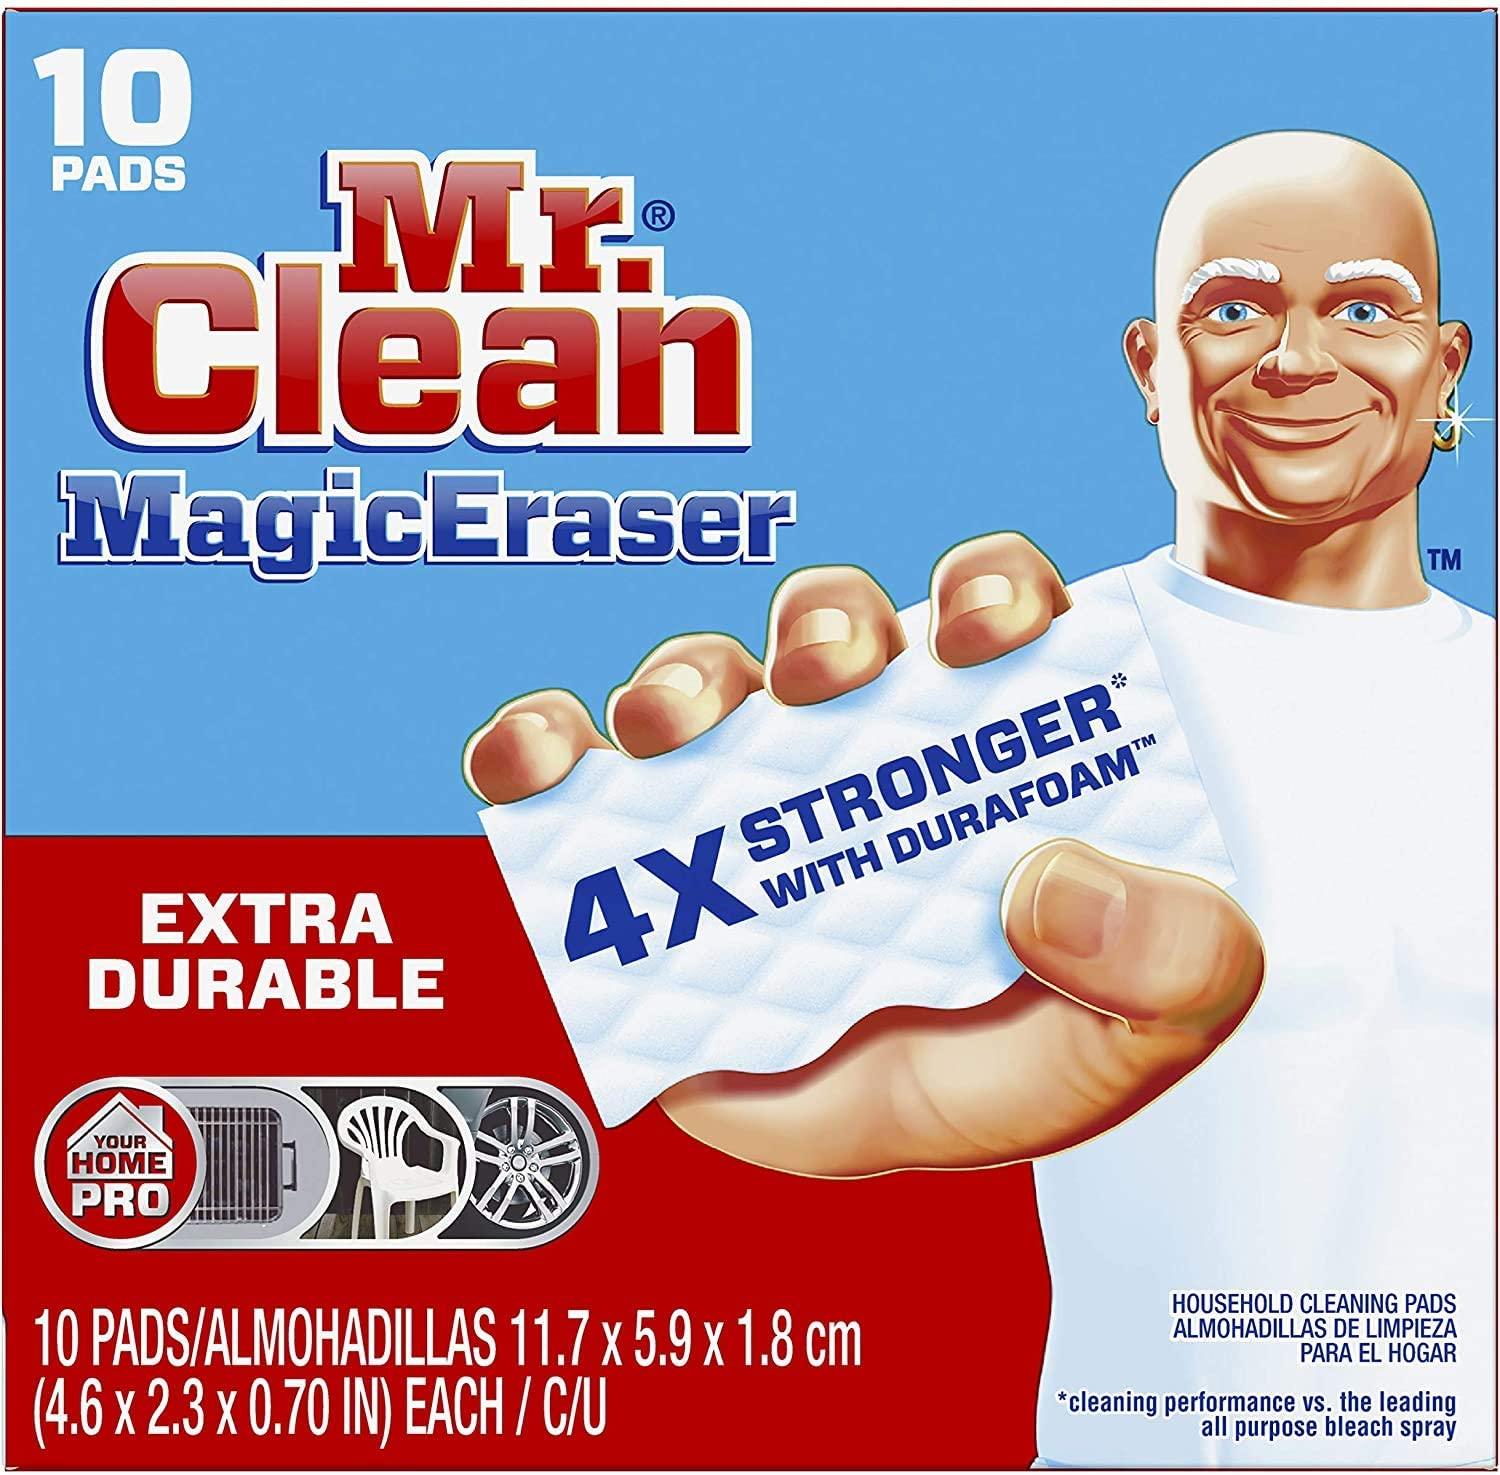 10 Mr Clean Magic Eraser Cleaning Pads for $6.19 Shipped